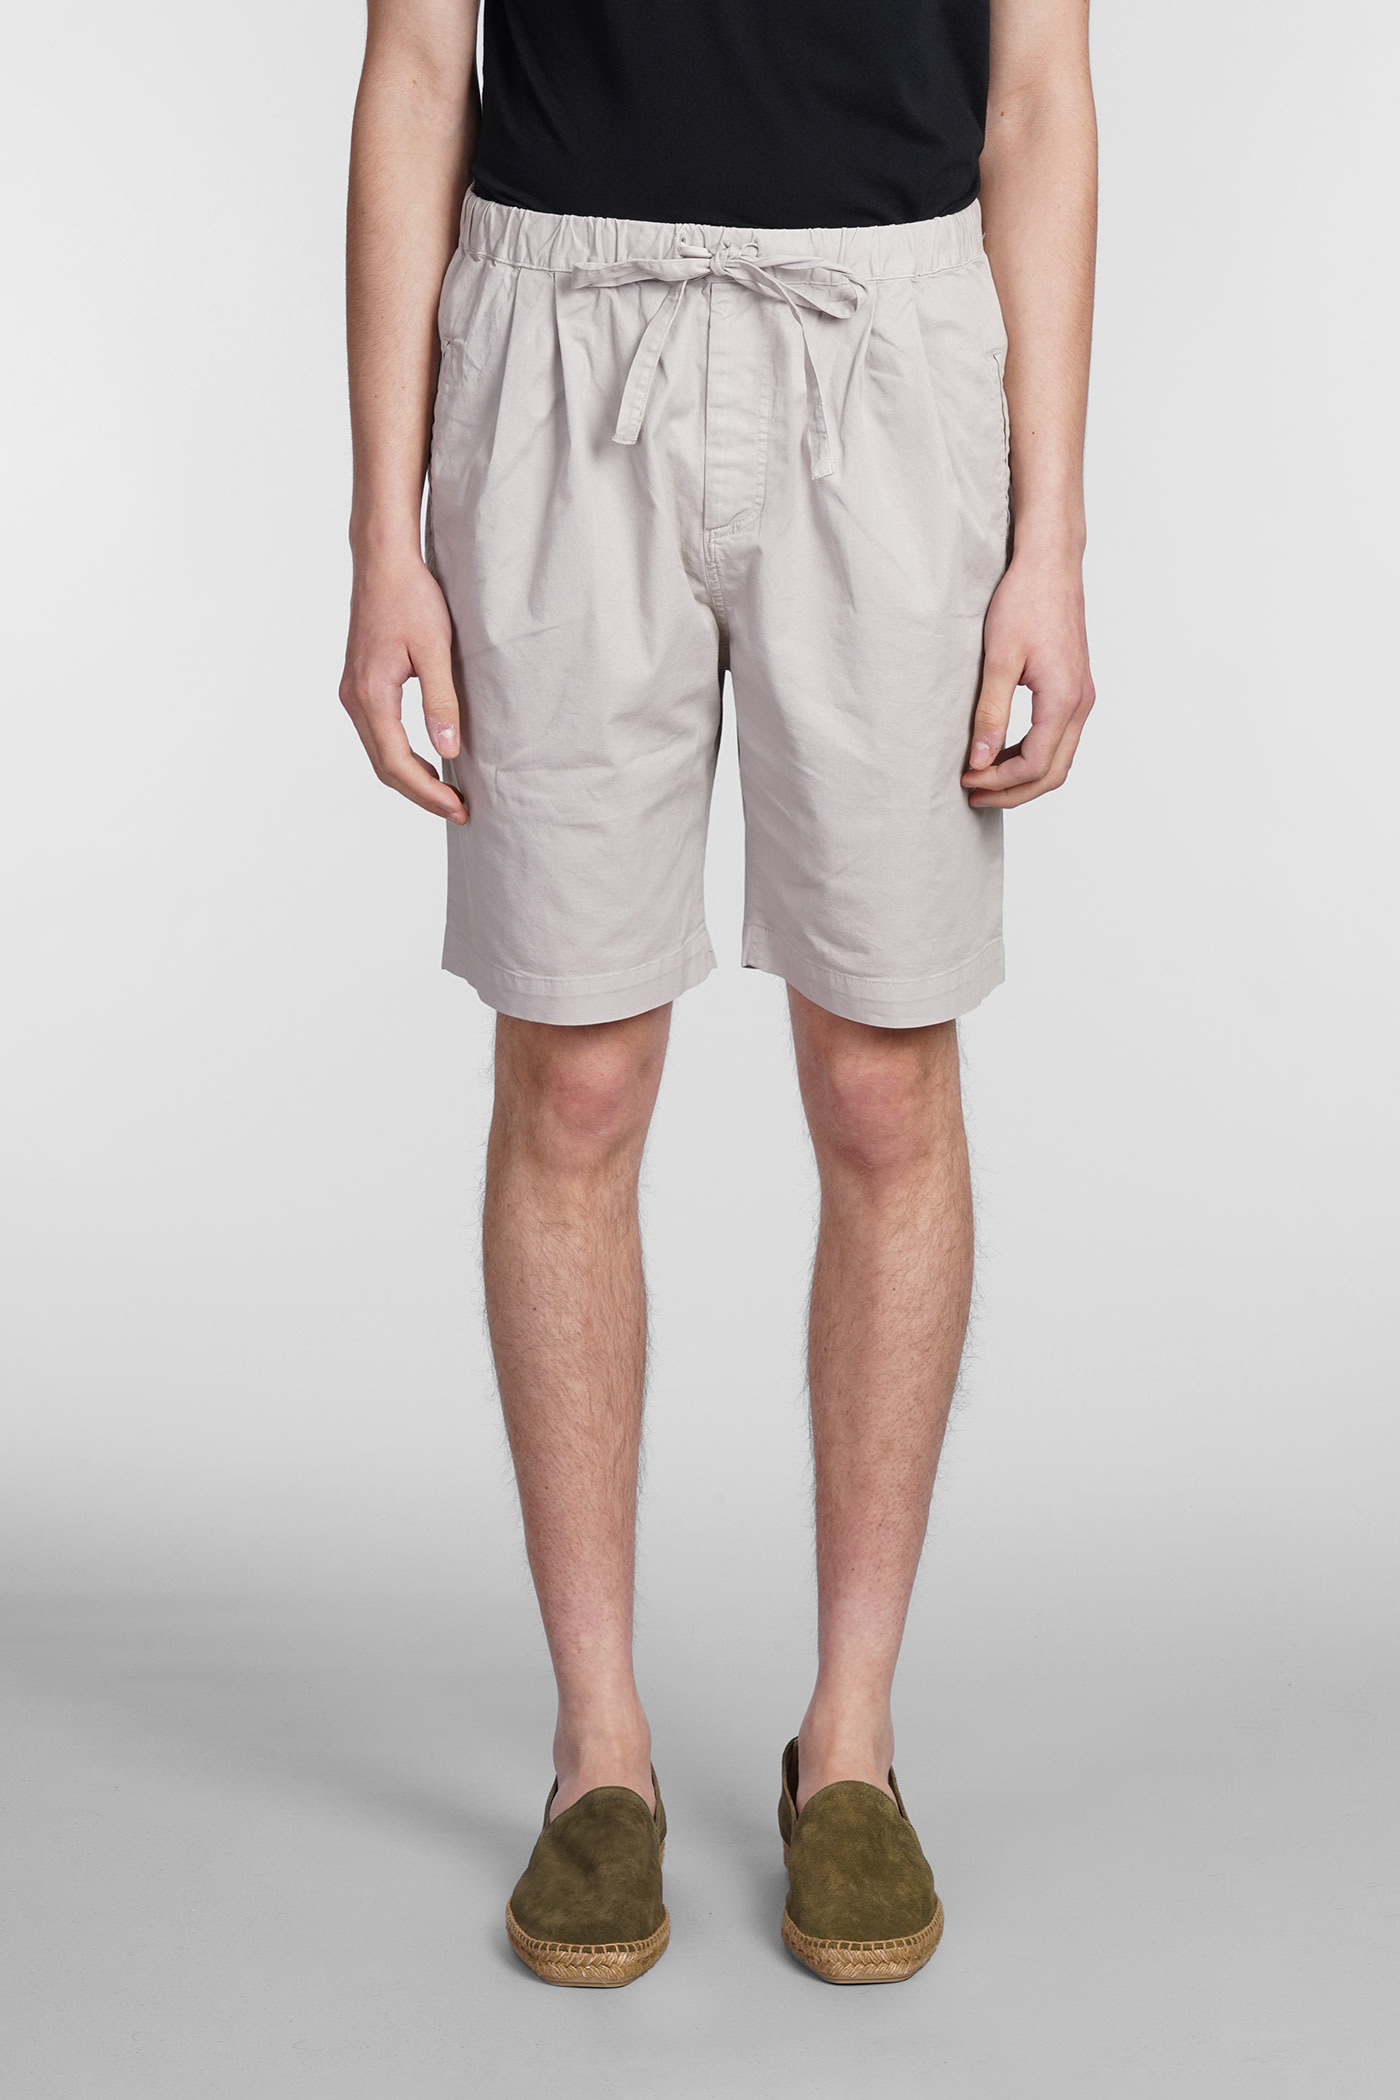 MASSIMO ALBA KEVIN SHORTS IN BEIGE COTTON